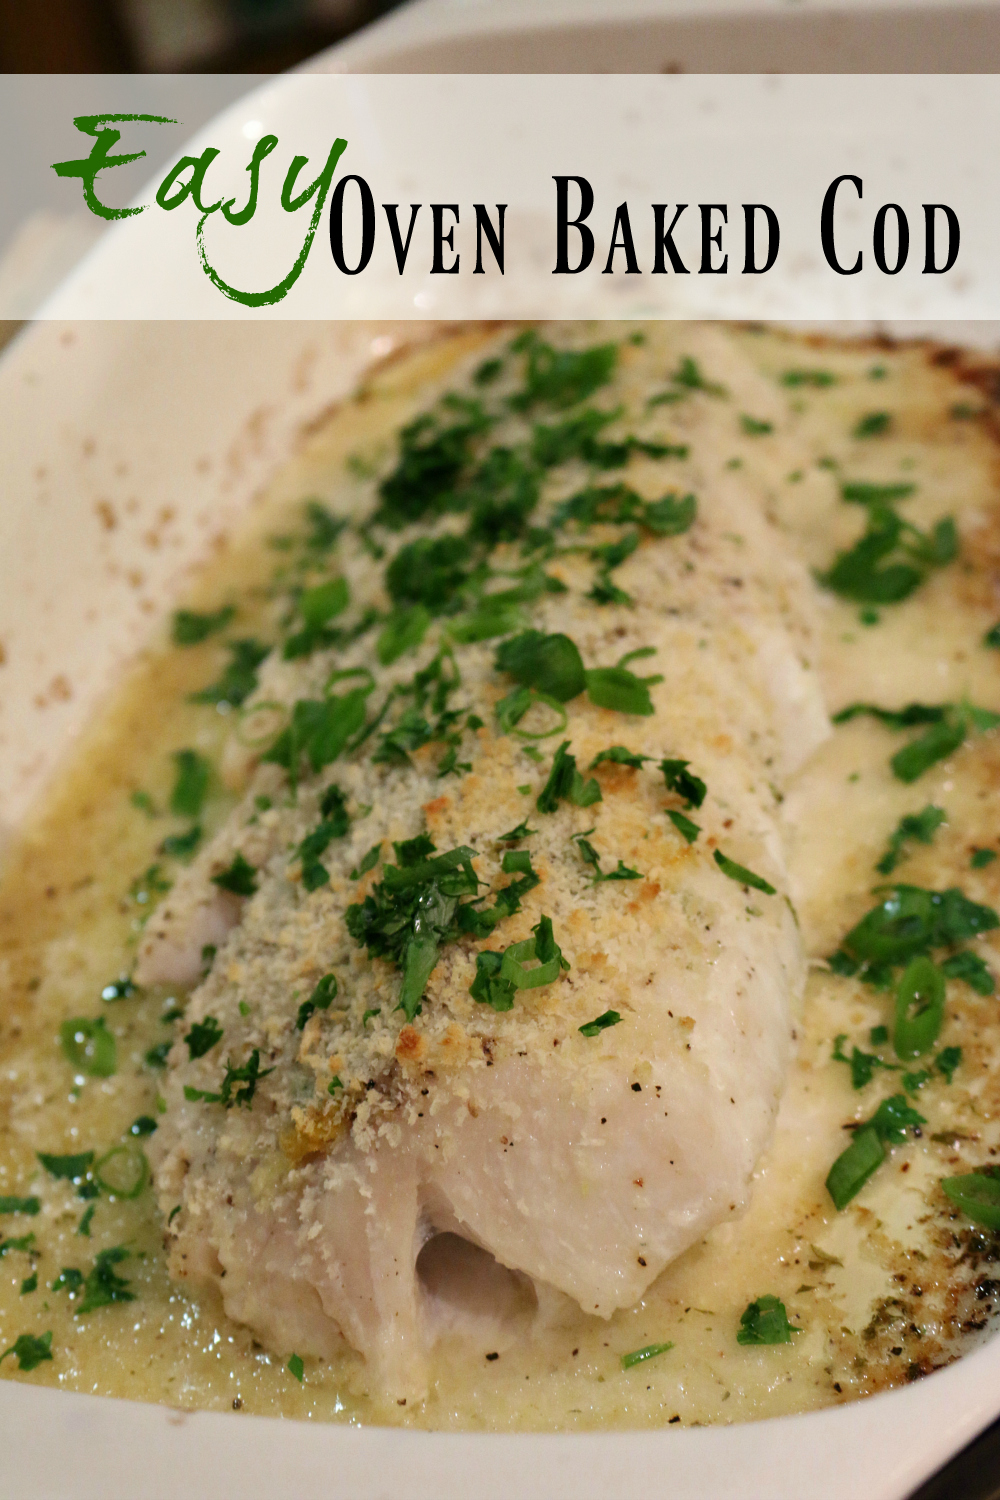 I used panko bread crumbs to add an extra layer of flavorr. The fresh lemon and herbs and lemon juice and zest really make the dish. Easy recipe for Oven Baked Cod.